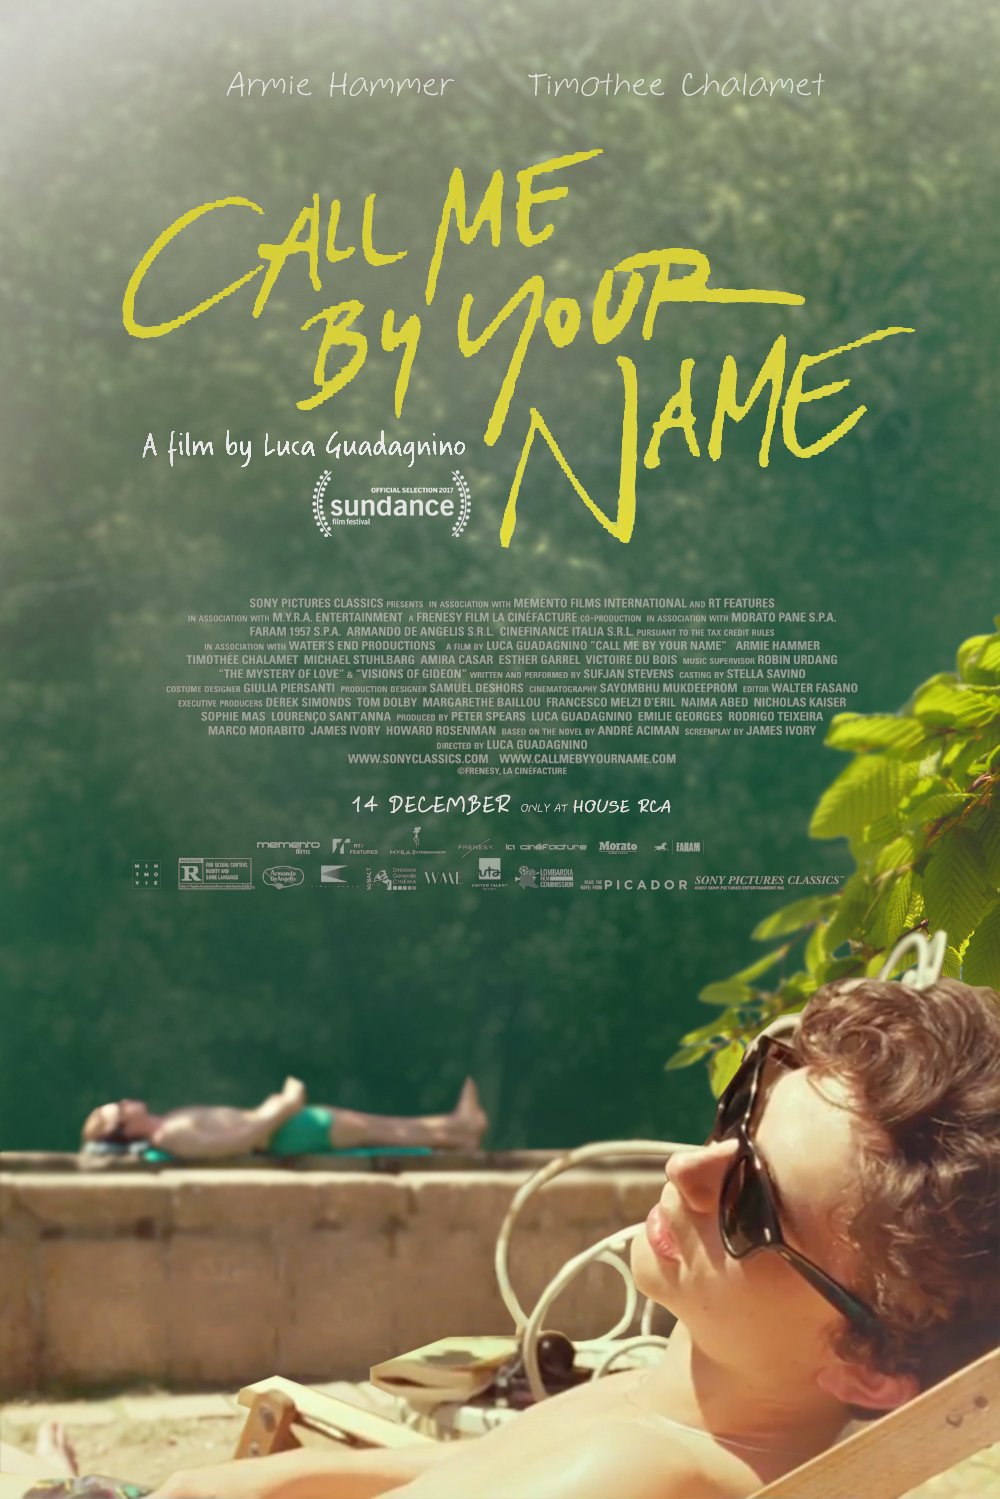 in-theaters-call-me-by-your-name